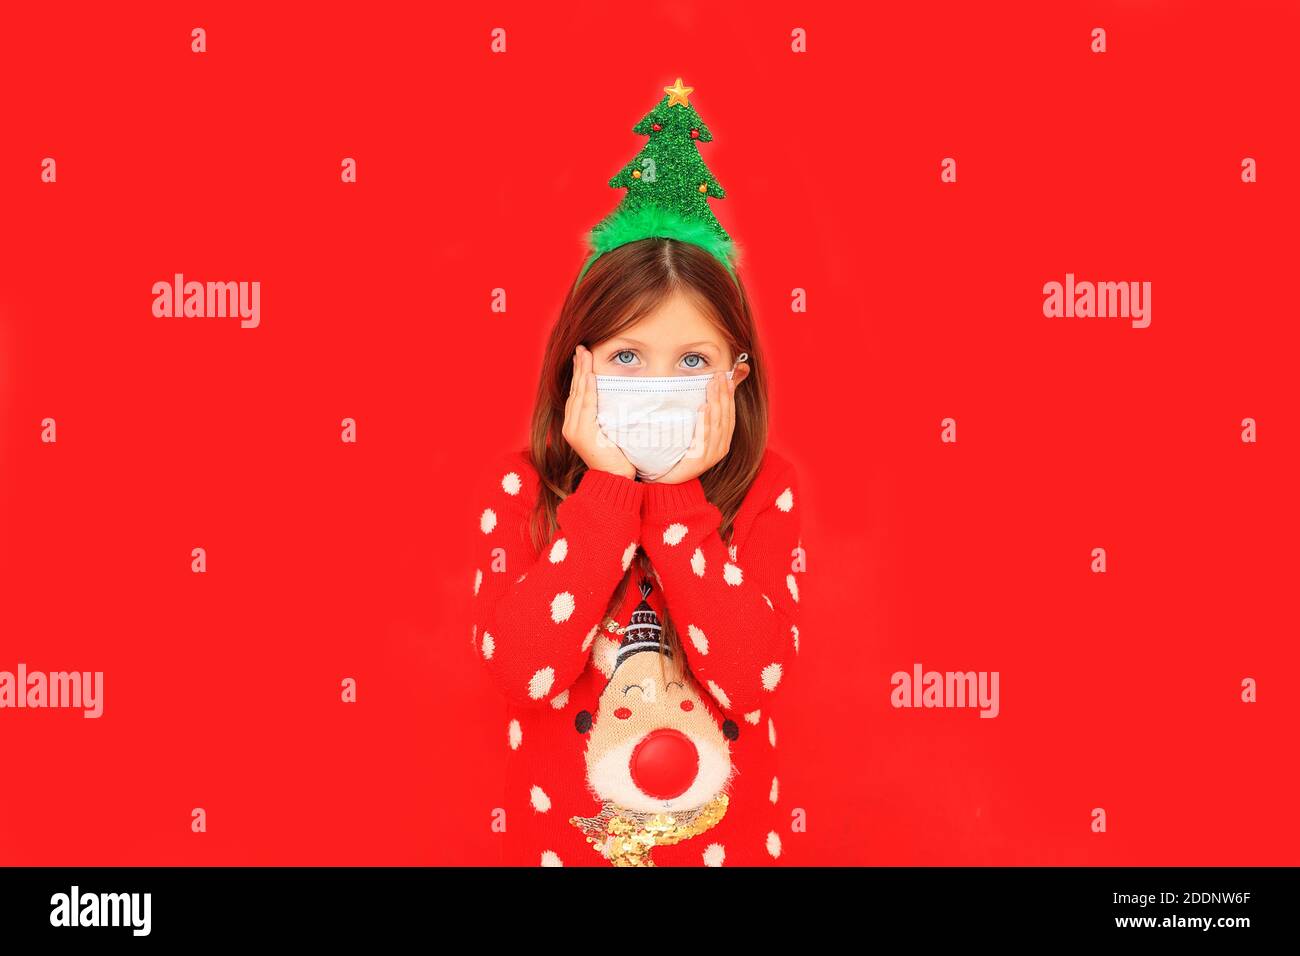 Child in a respiratory mask and a New Year's sweater on a red background. Girl in a red Christmas sweater during the quarantine period Stock Photo